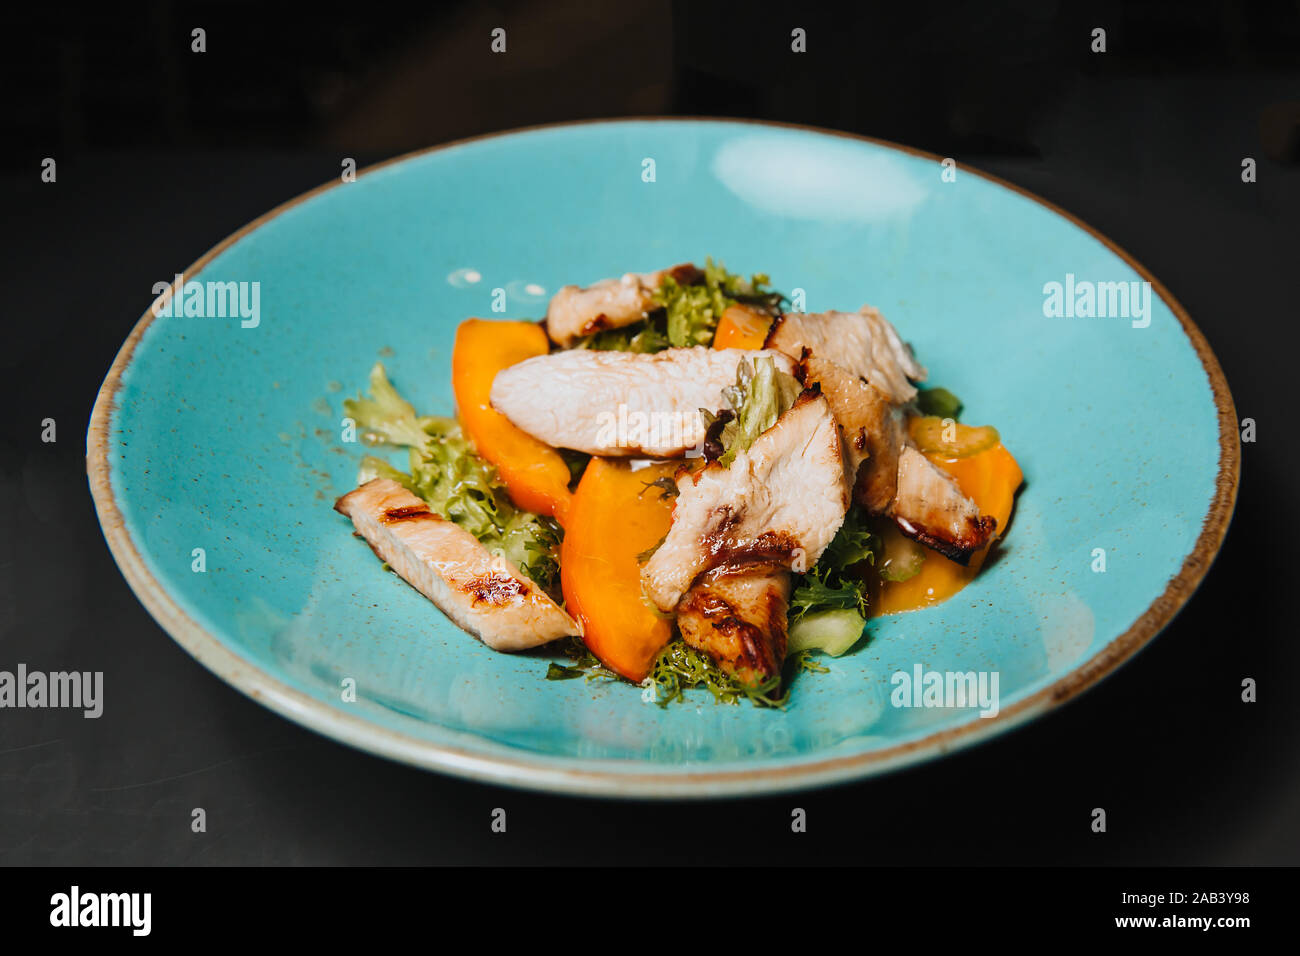 Meat, cooked grill, cut into pieces lies with vegetables on a round, blue plate. Stock Photo